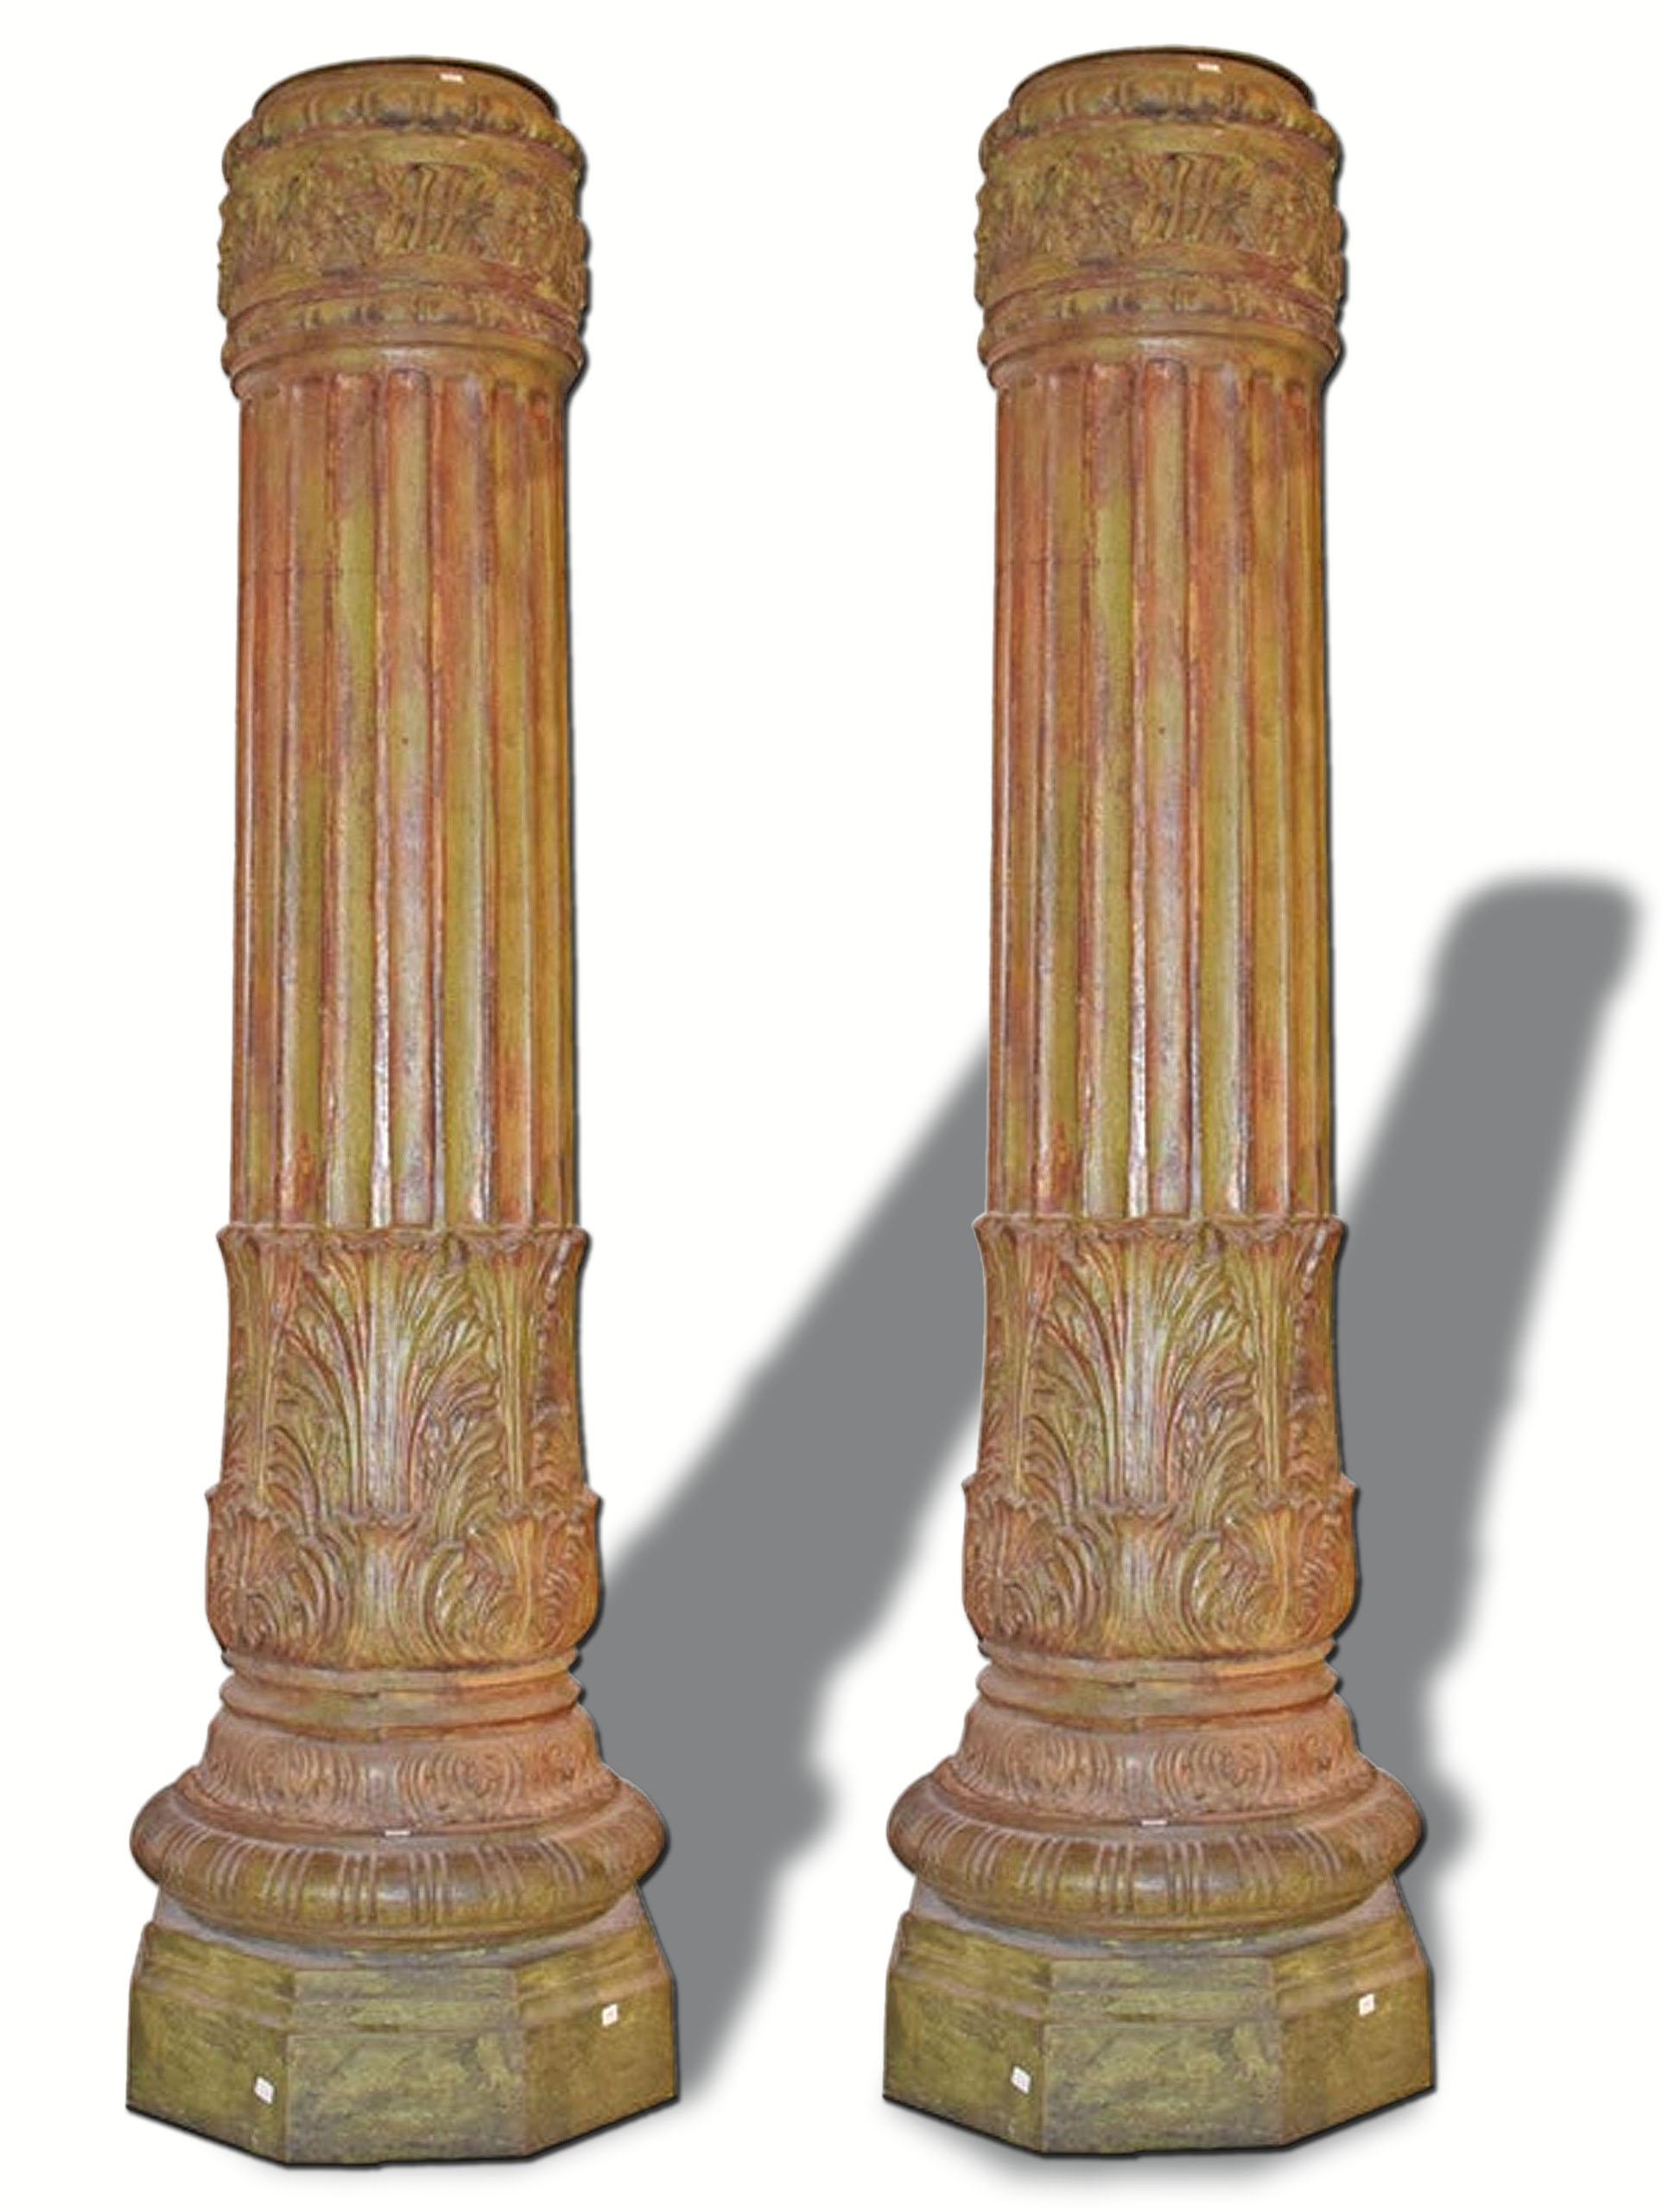 Magnificent pair of antique fluted French iron columns with floral decoration, measures: 77 inches tall, octagonal base is 20 inches x 20 inches.